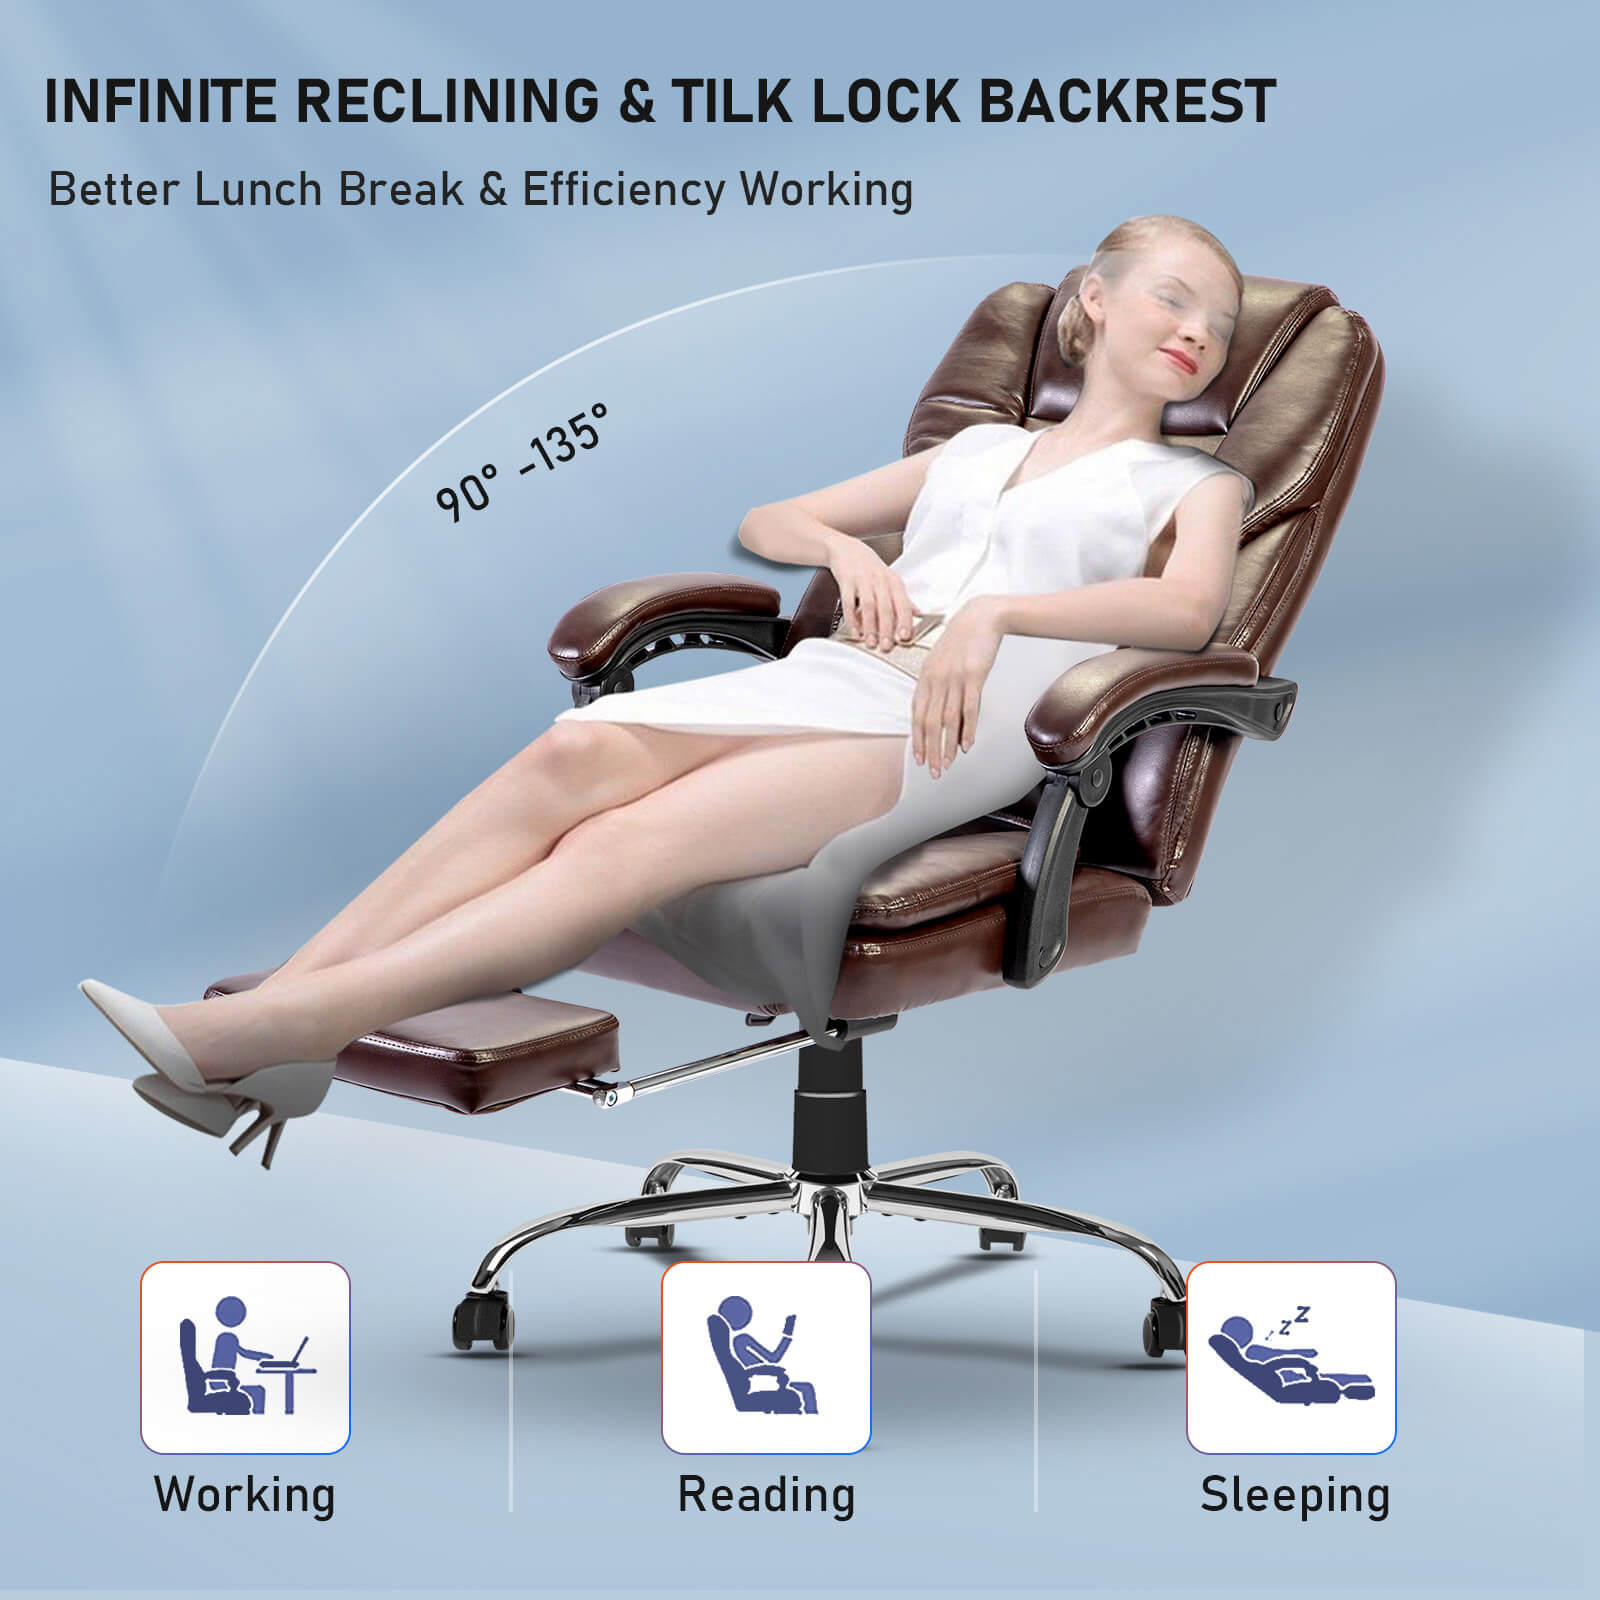 Big and Tall Ergonomic Executive Office Chair w/ 4-Point Massage & Heating, Reclining Backrest, Footrest & Pillow, Brown